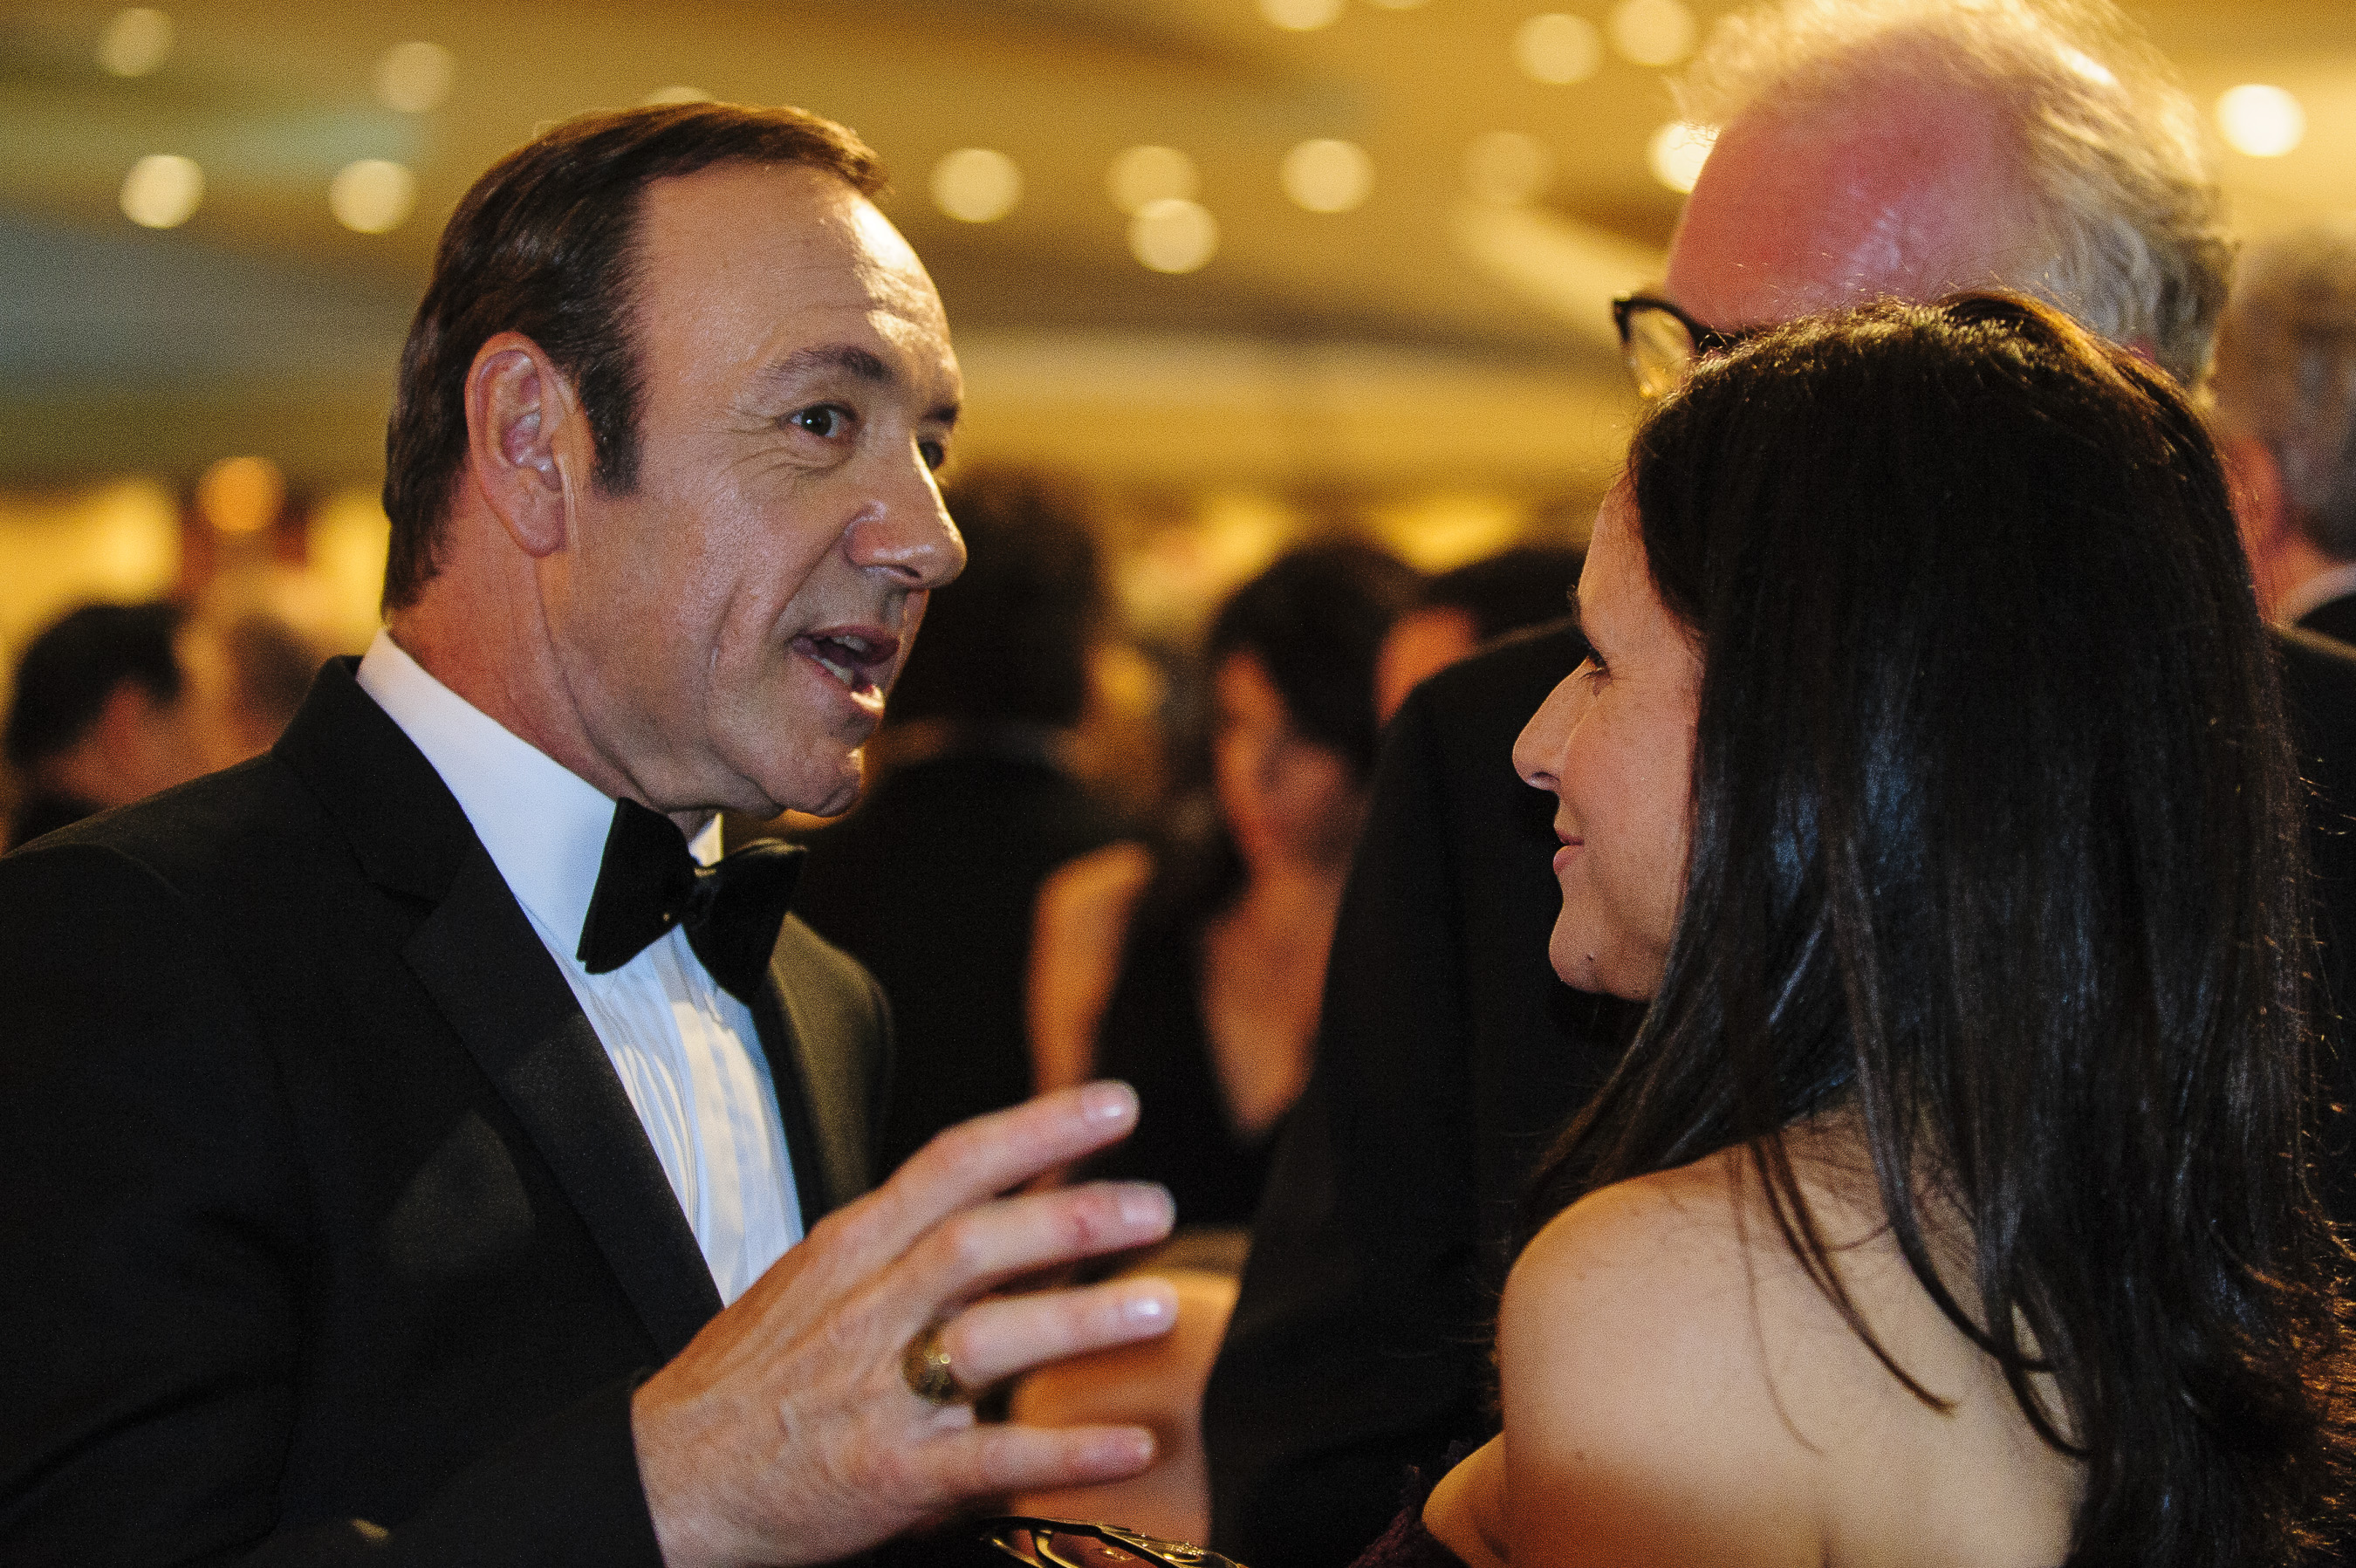 WASHINGTON, DC - APRIL 27: Actor Kevin Spacy talks with actress Julia Louis-Dreyfus during the White House Correspondents' Association Dinner on April 27, 2013 in Washington, DC. The dinner is an annual event attended by journalists, politicians and celebrities.   Pete Marovich-Pool/Getty Images/AFP (Photo by POOL / GETTY IMAGES NORTH AMERICA / Getty Images via AFP)